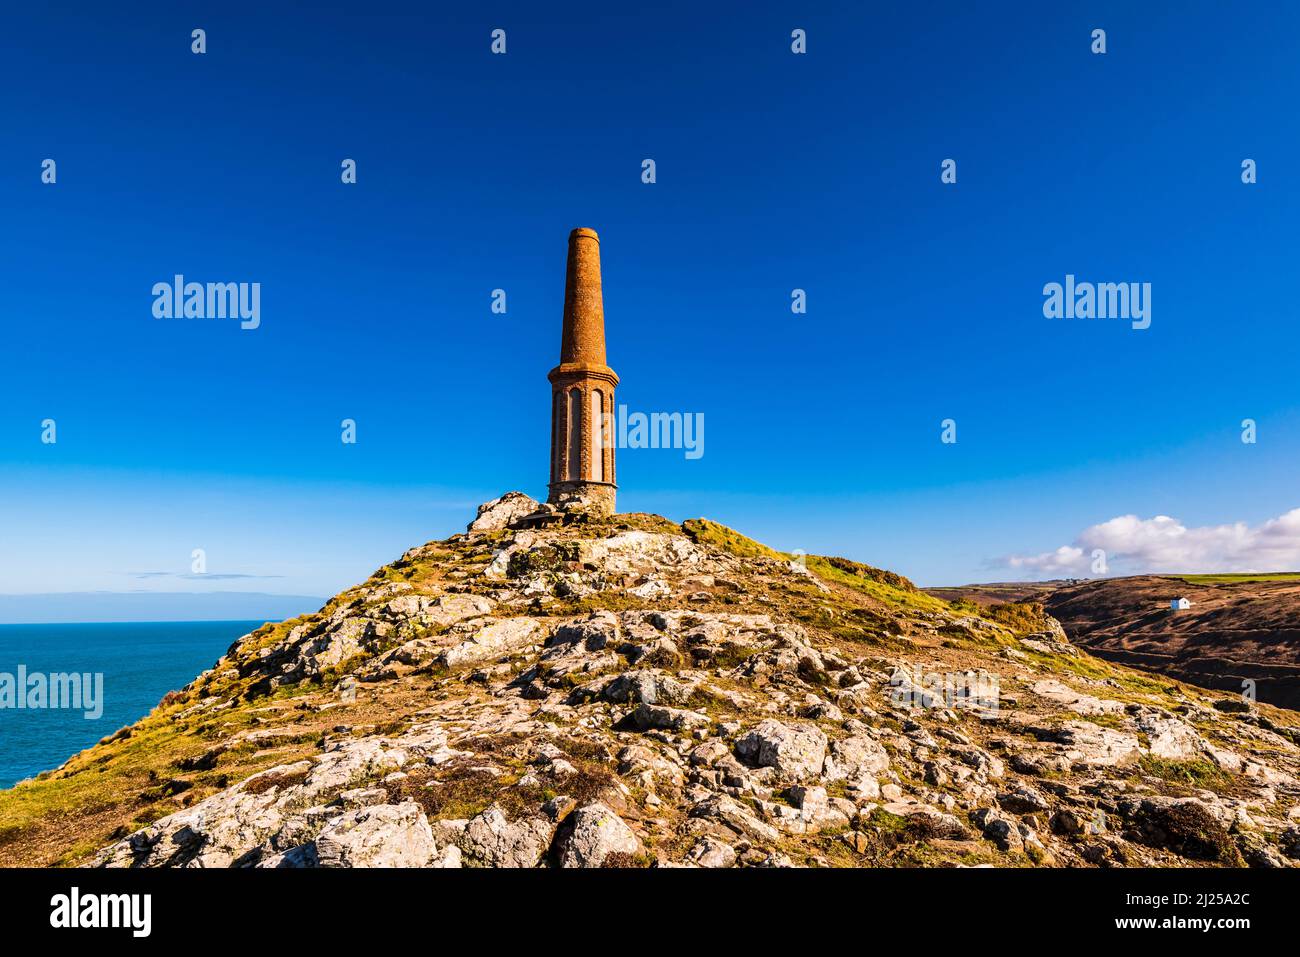 The Cape Cornwall Mine chimney and looking out to sea, from Cape Cornwall, near Land's End, Penzance, Cornwall, UK Stock Photo